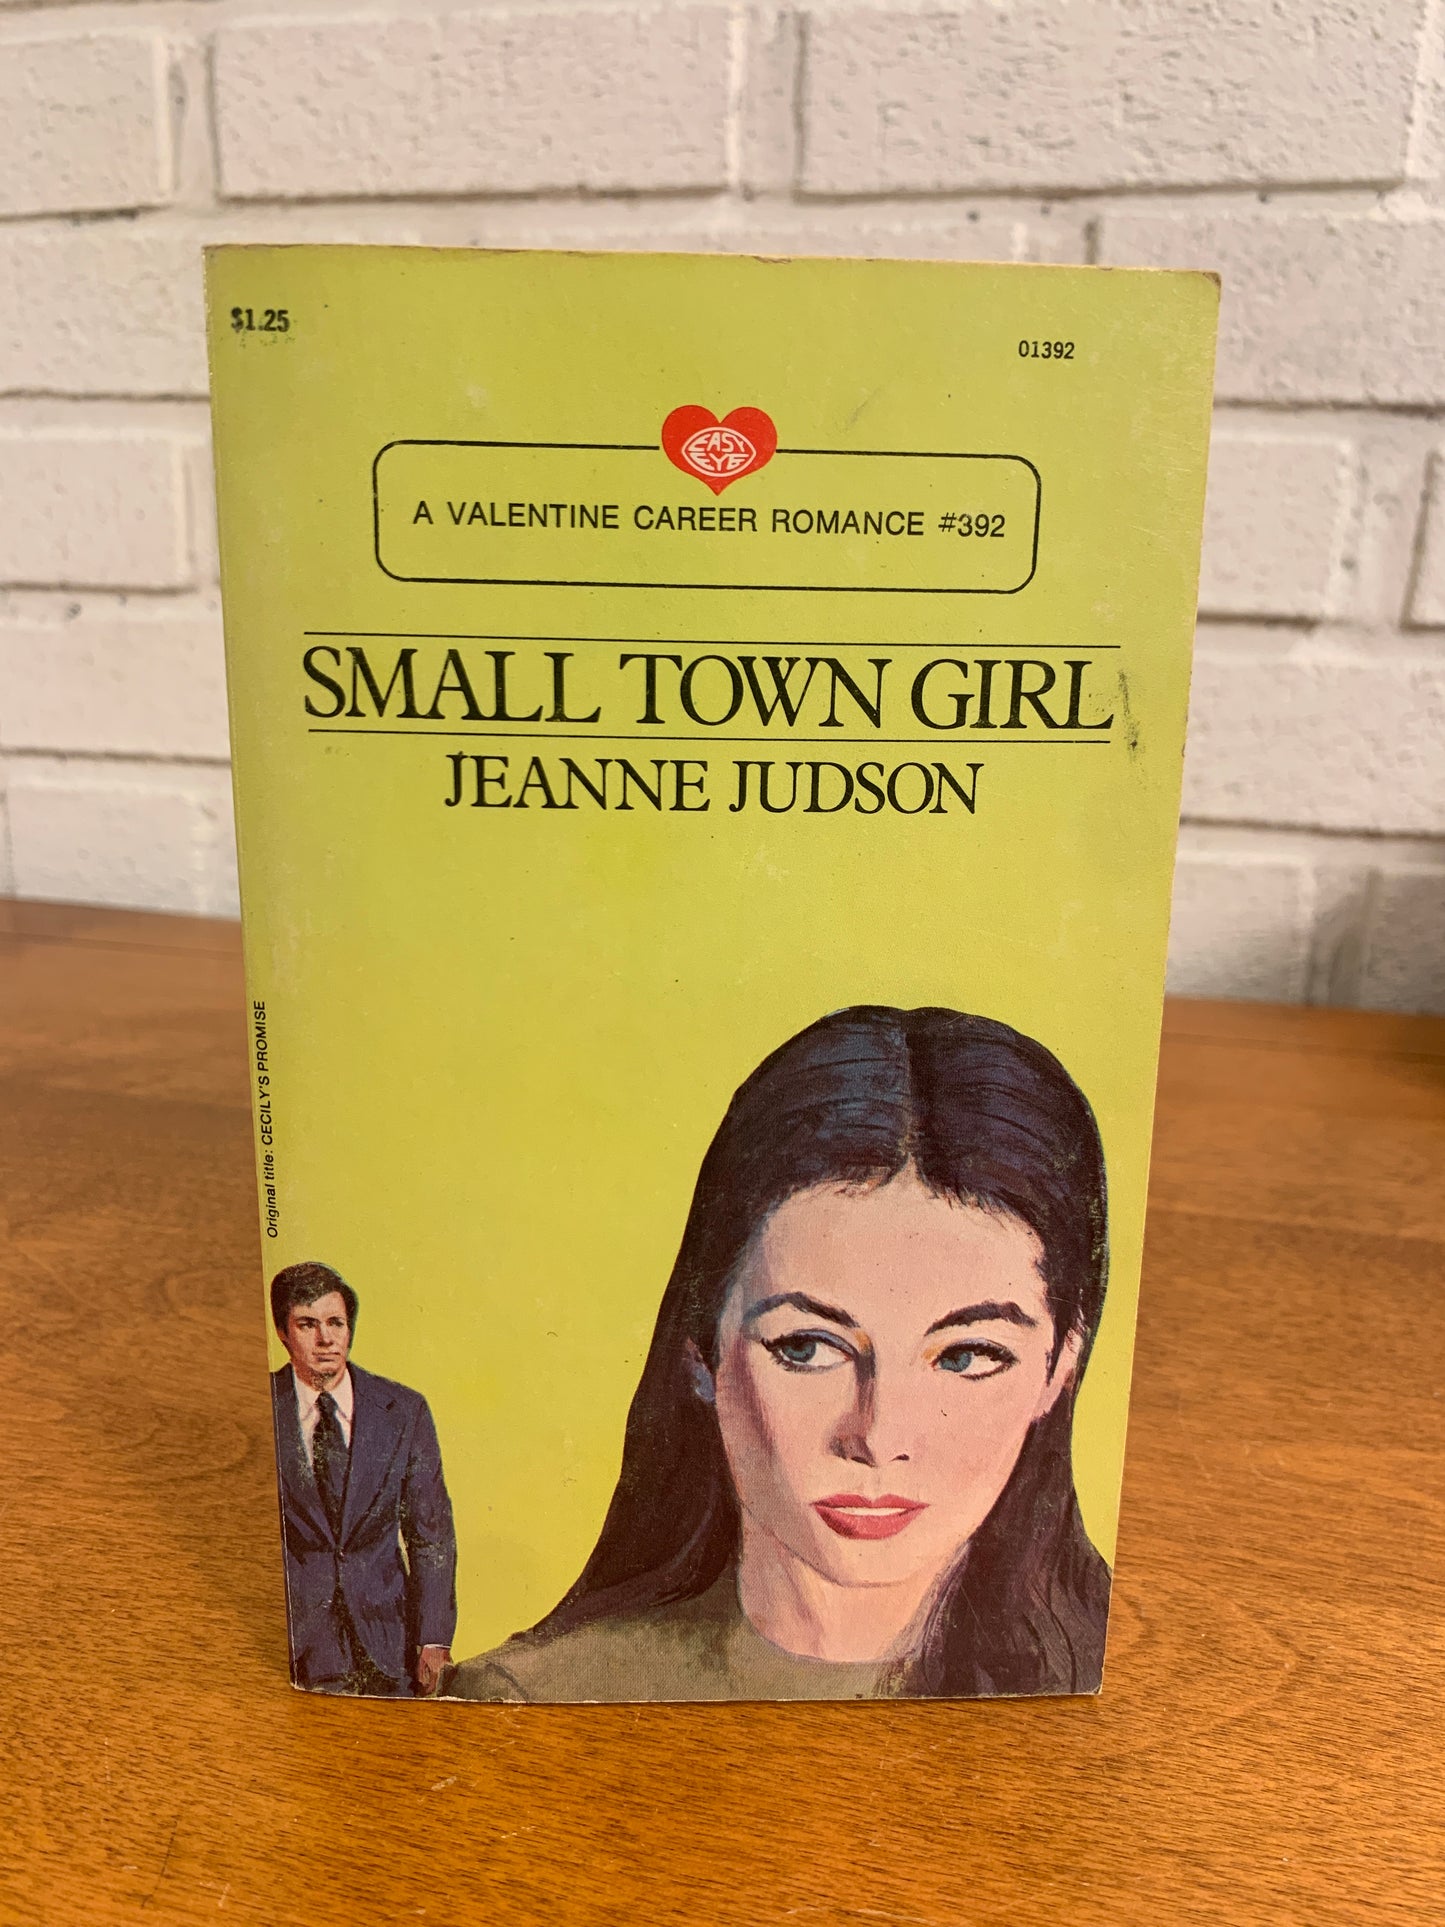 Small Town Girl by Jeanne Judson [1968, Easy Eye]